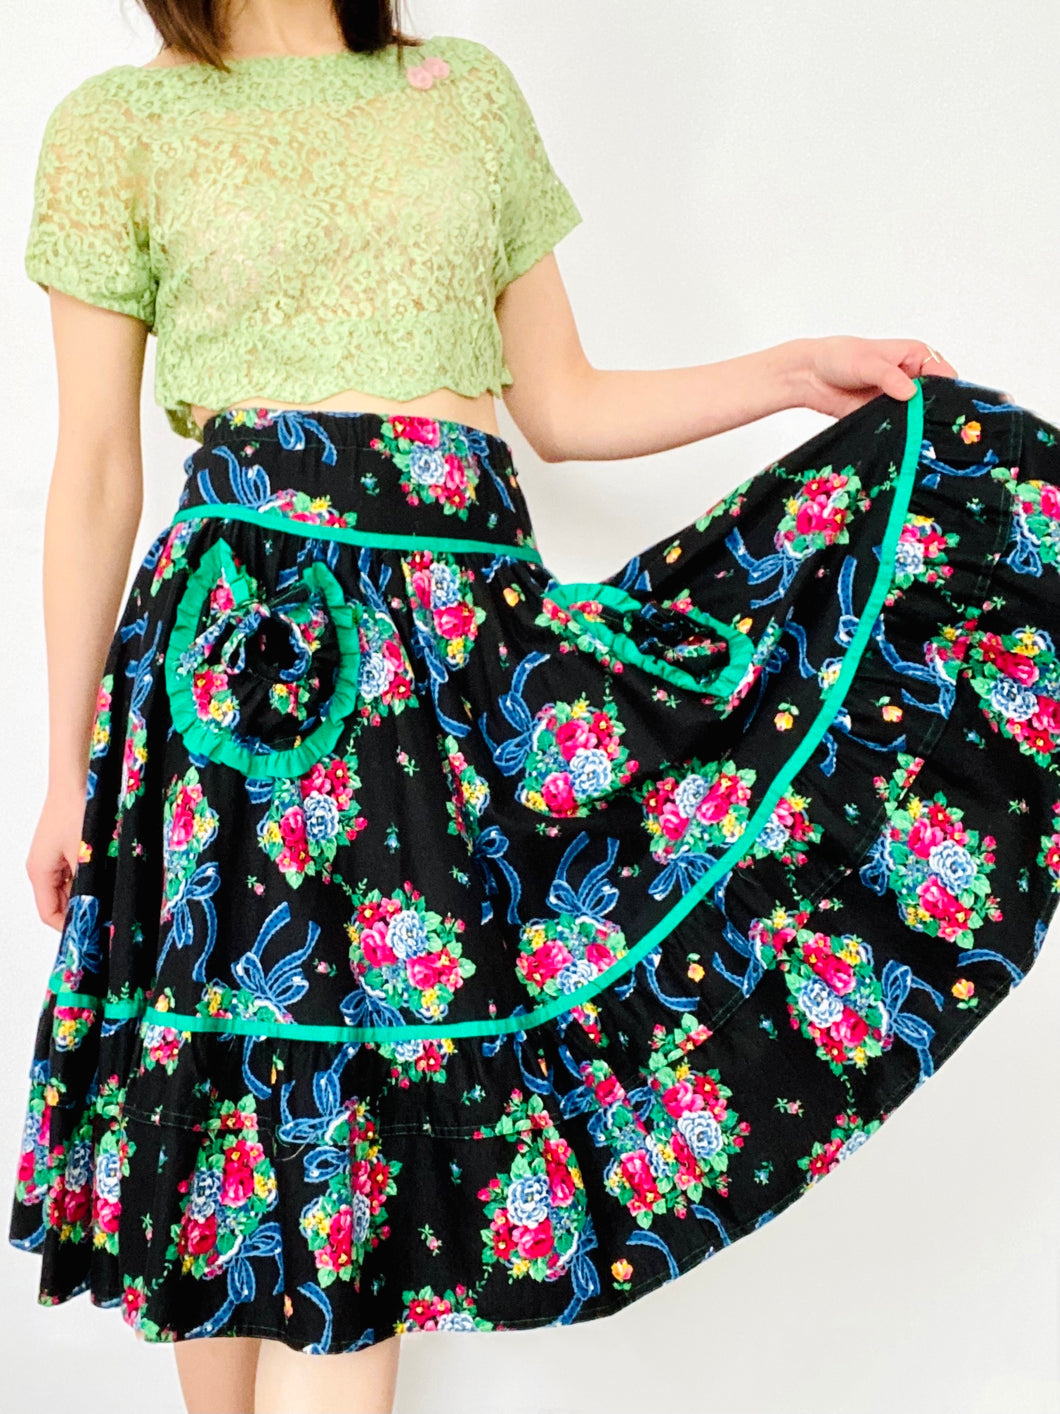 Vintage 1950s Novelty Print Floral Skirt with Heart Shaped Pockets